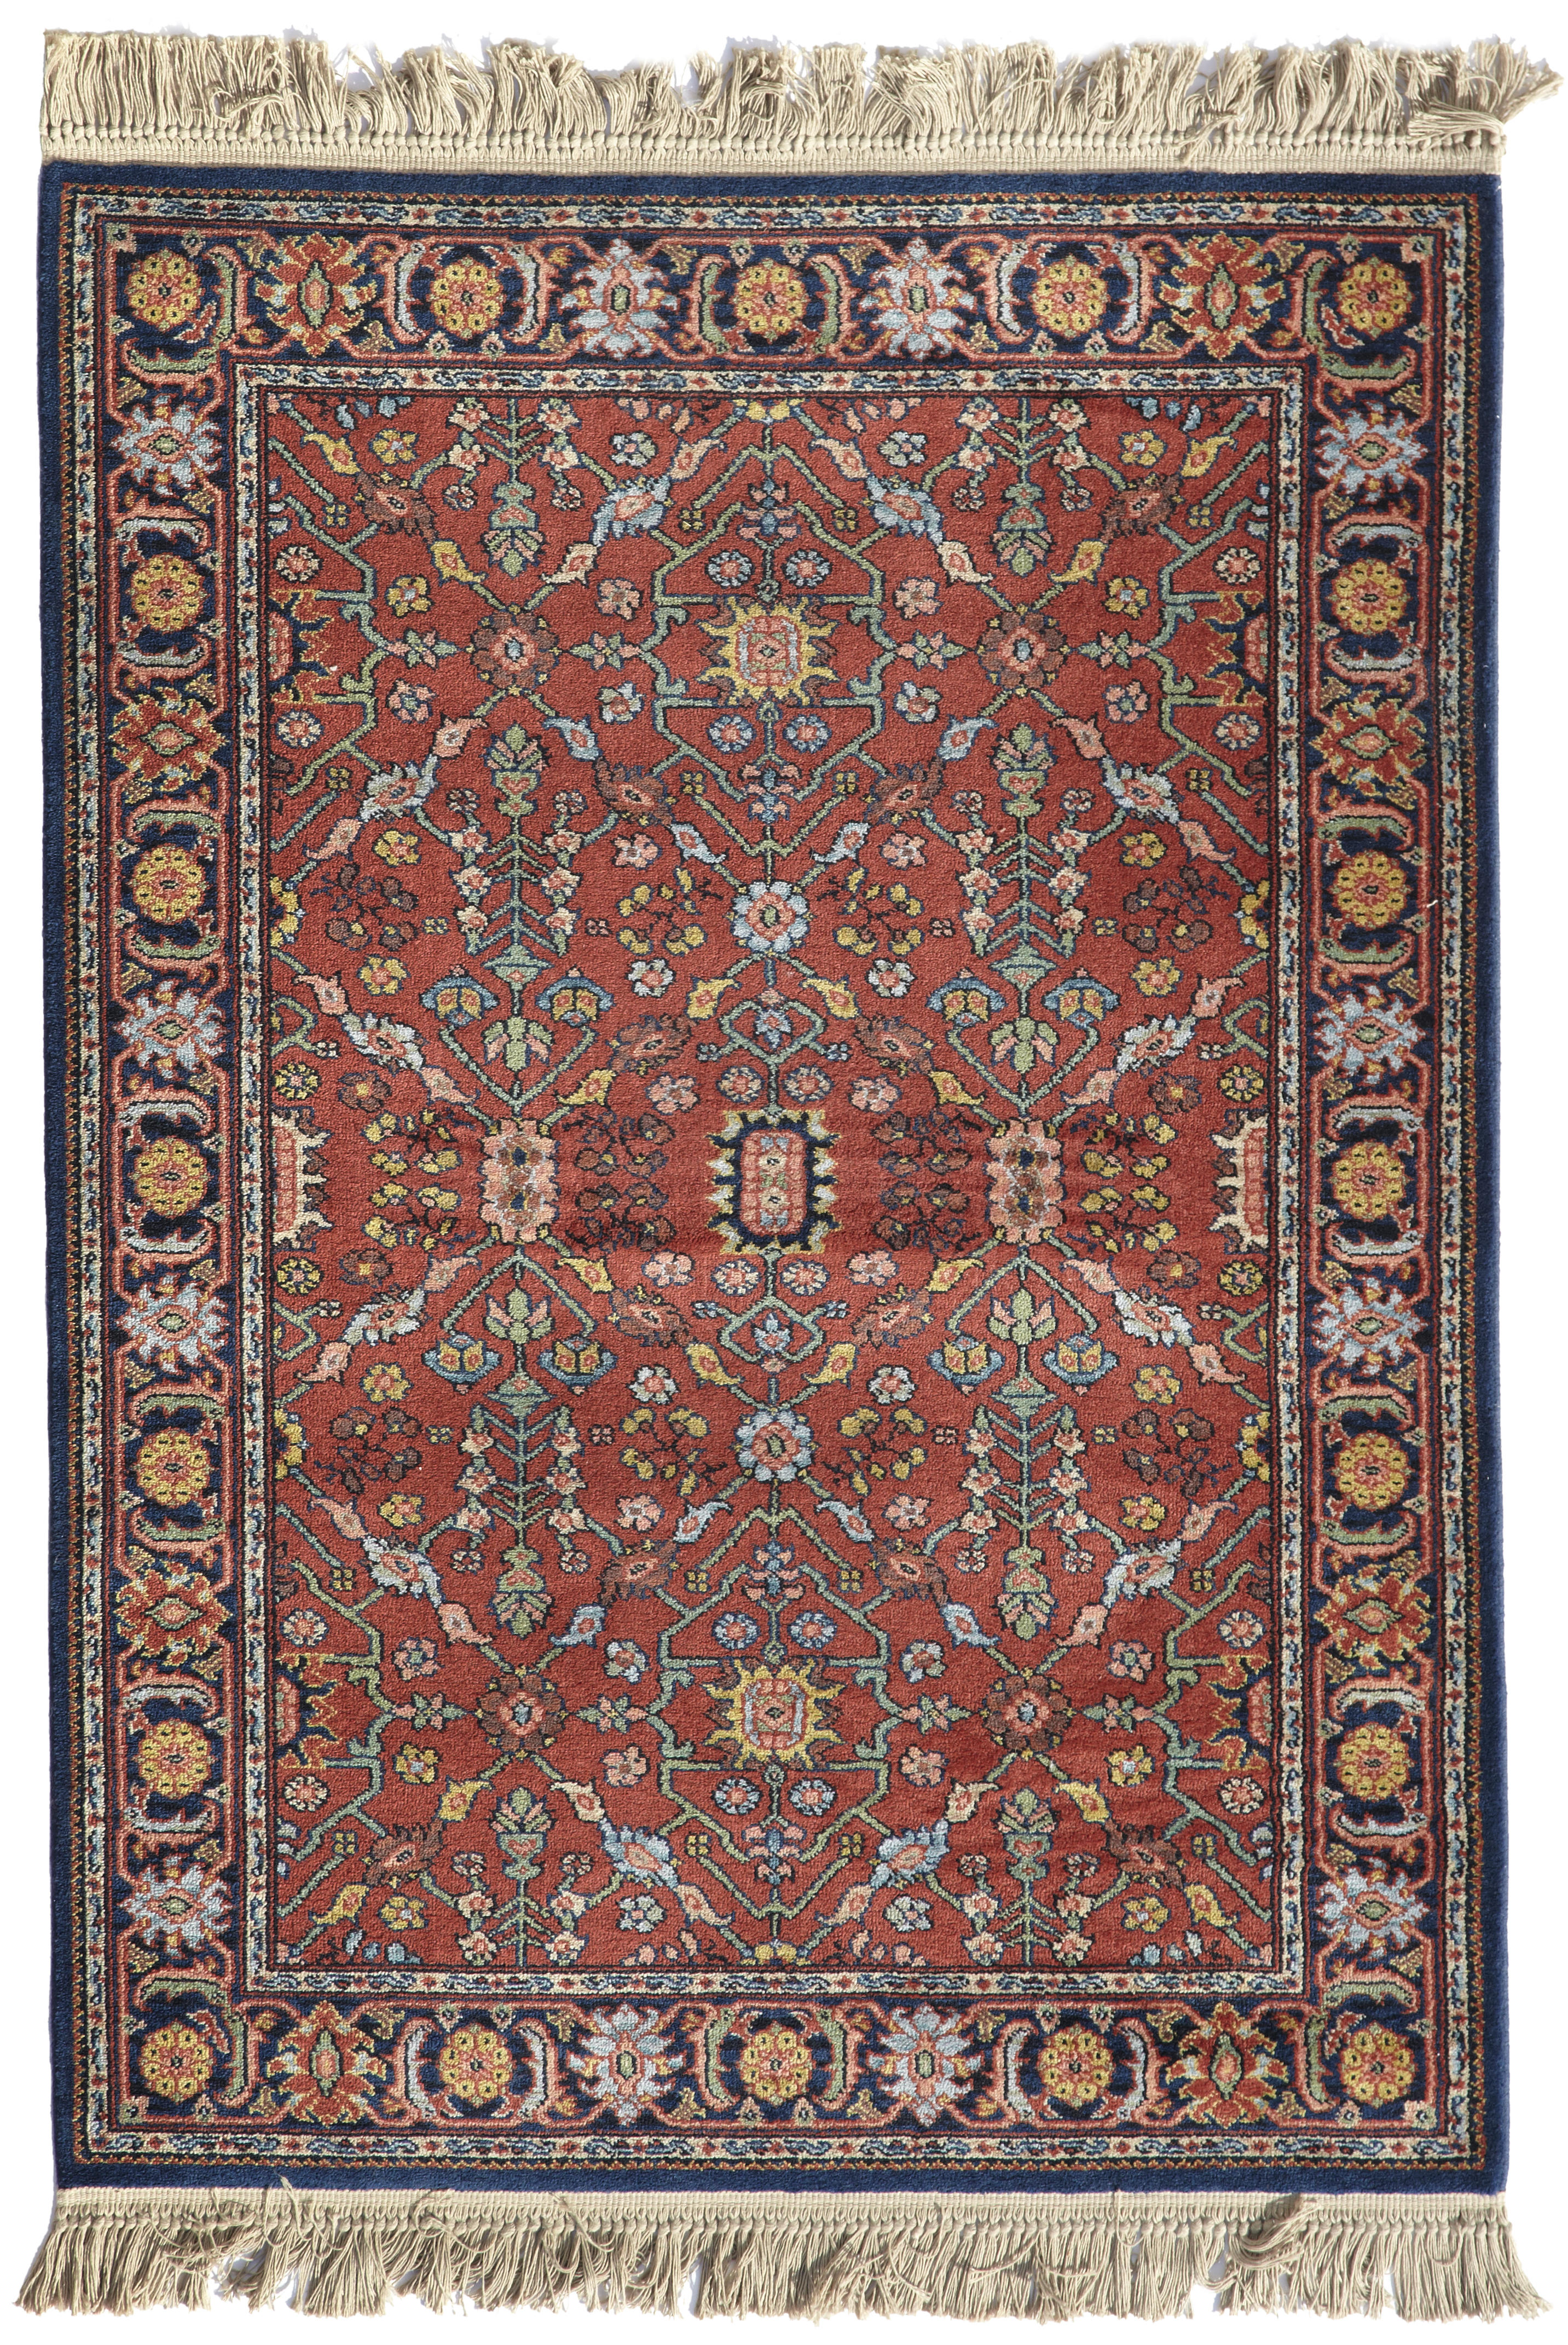 A contemporary rug dimensions 72in